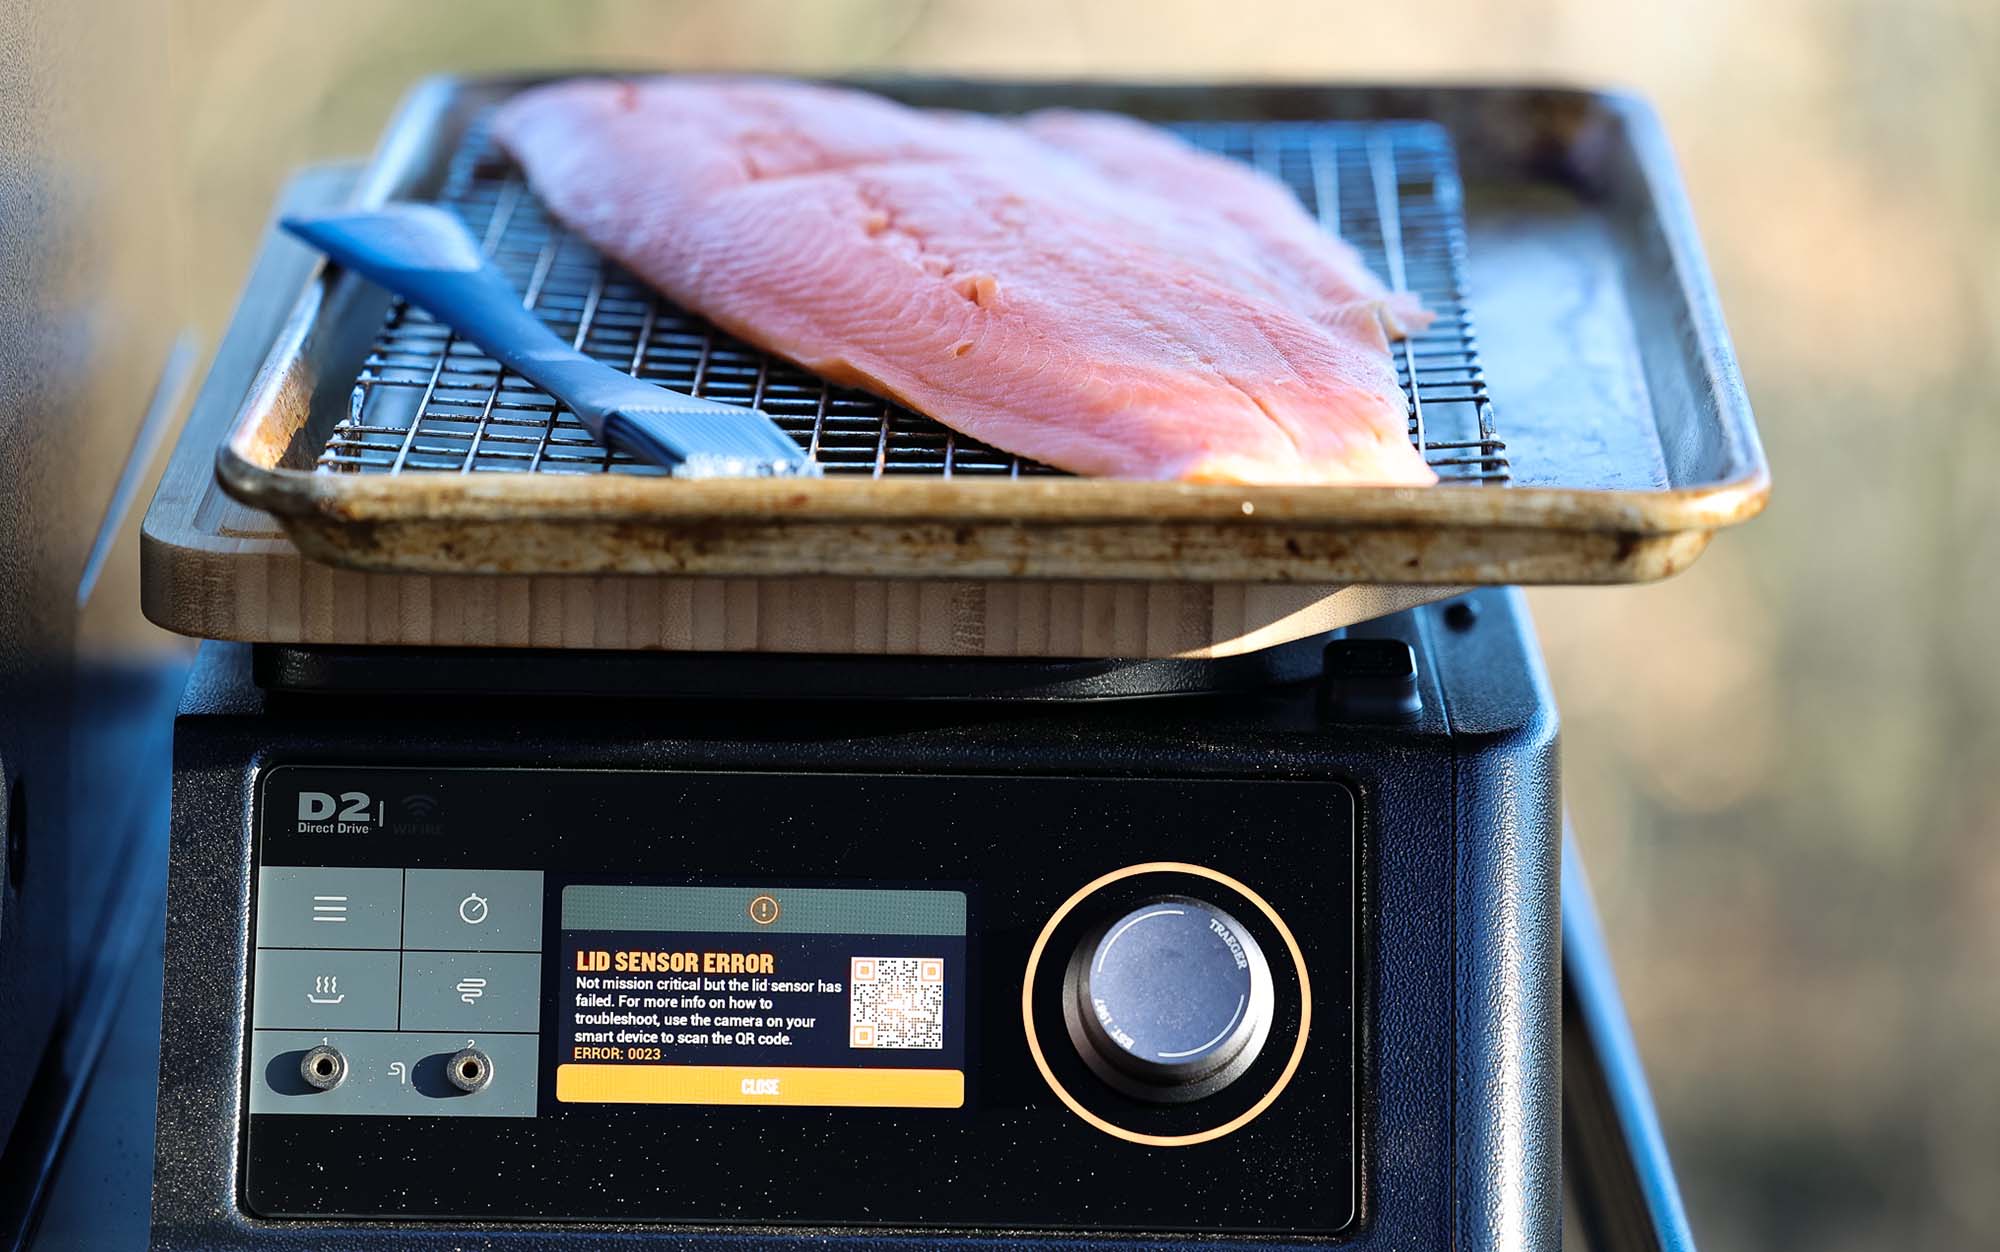 The Traeger Timberline XL provided easy-to-follow prompts to fix this touchscreen error.